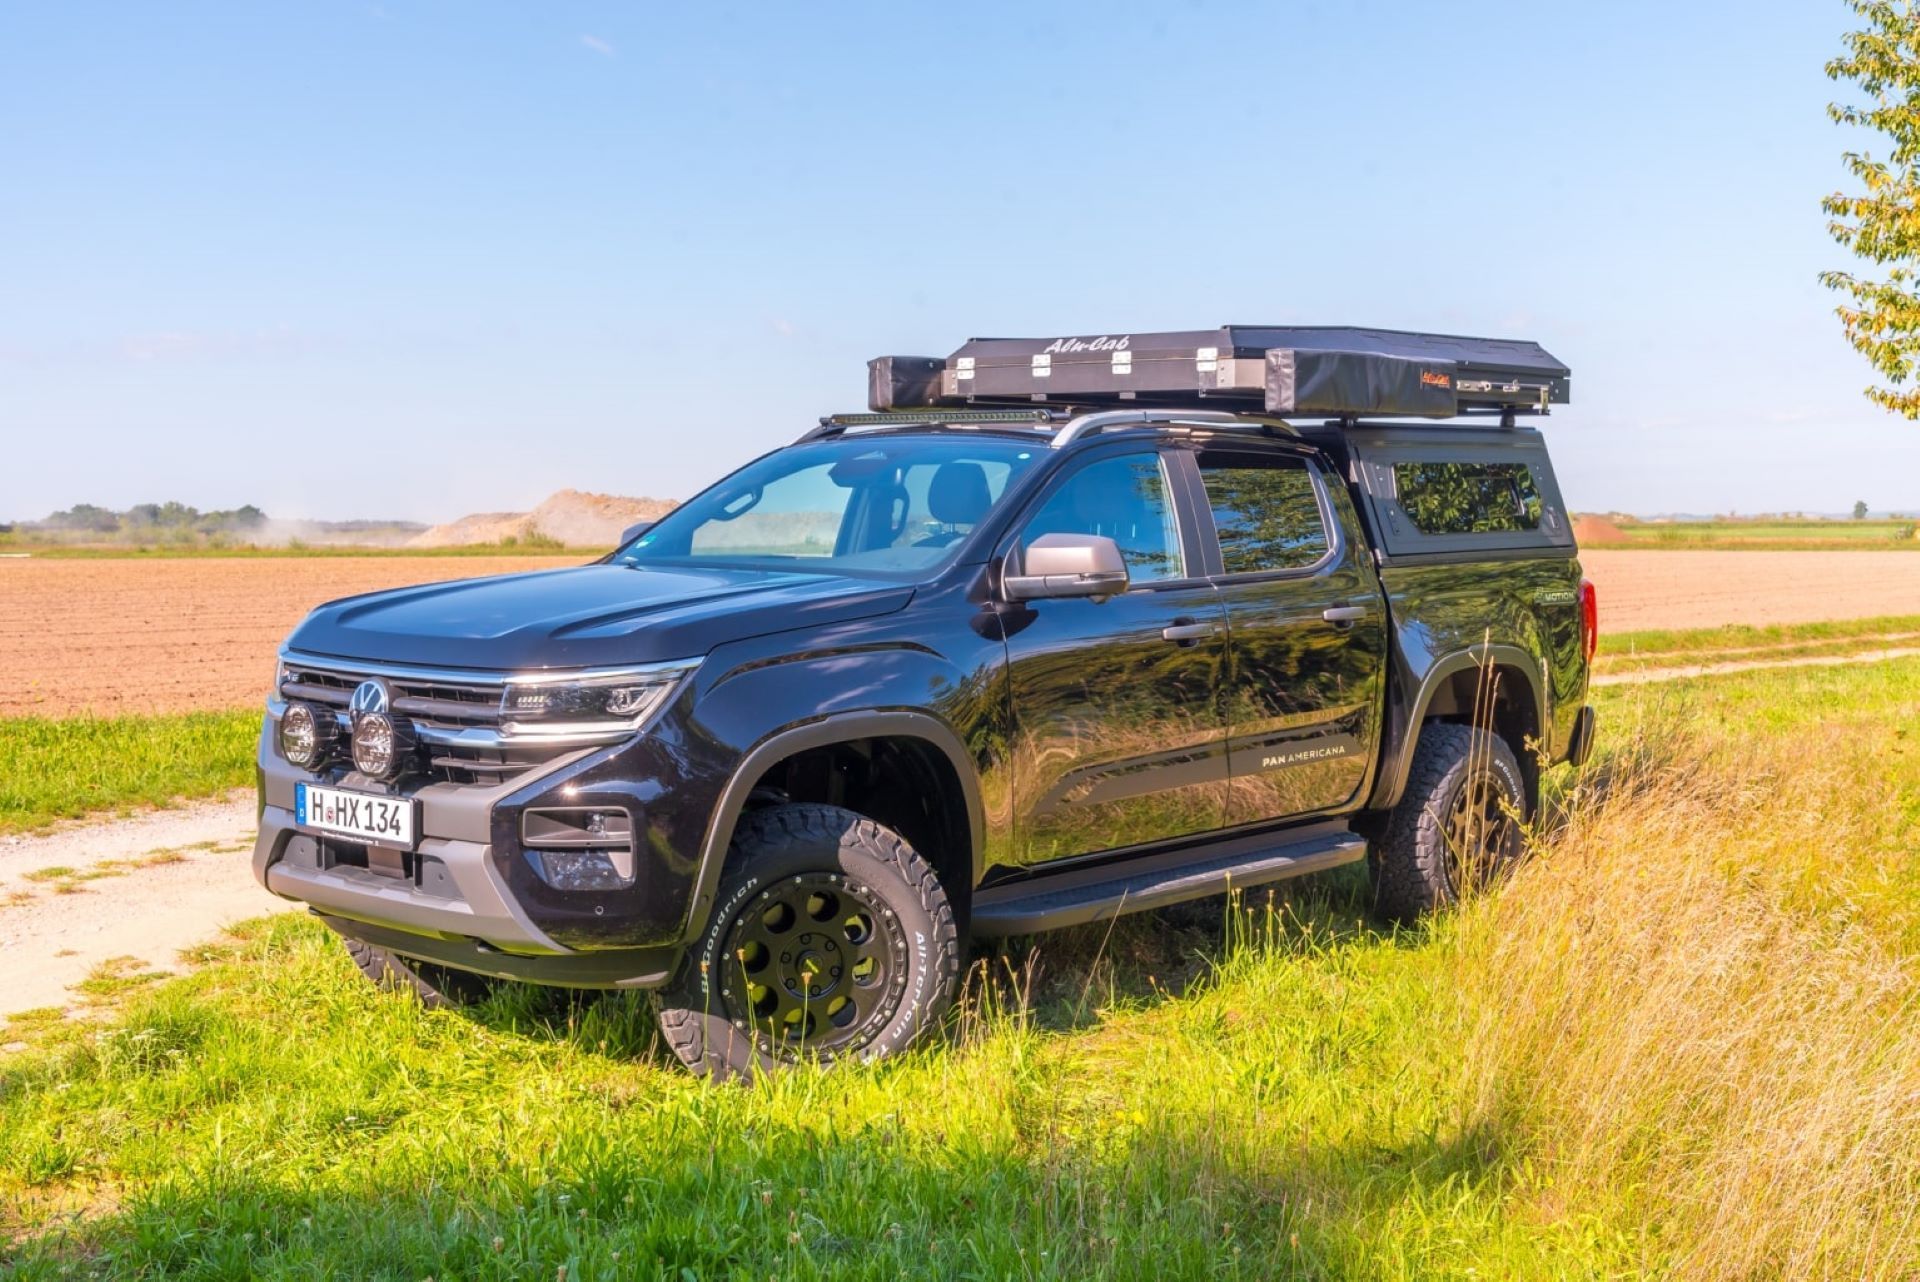 https://carsite.co.za/wp-content/uploads/2023/08/new-amarok-as-camper-van-with-rooftop-tent-and-hardtop.jpg